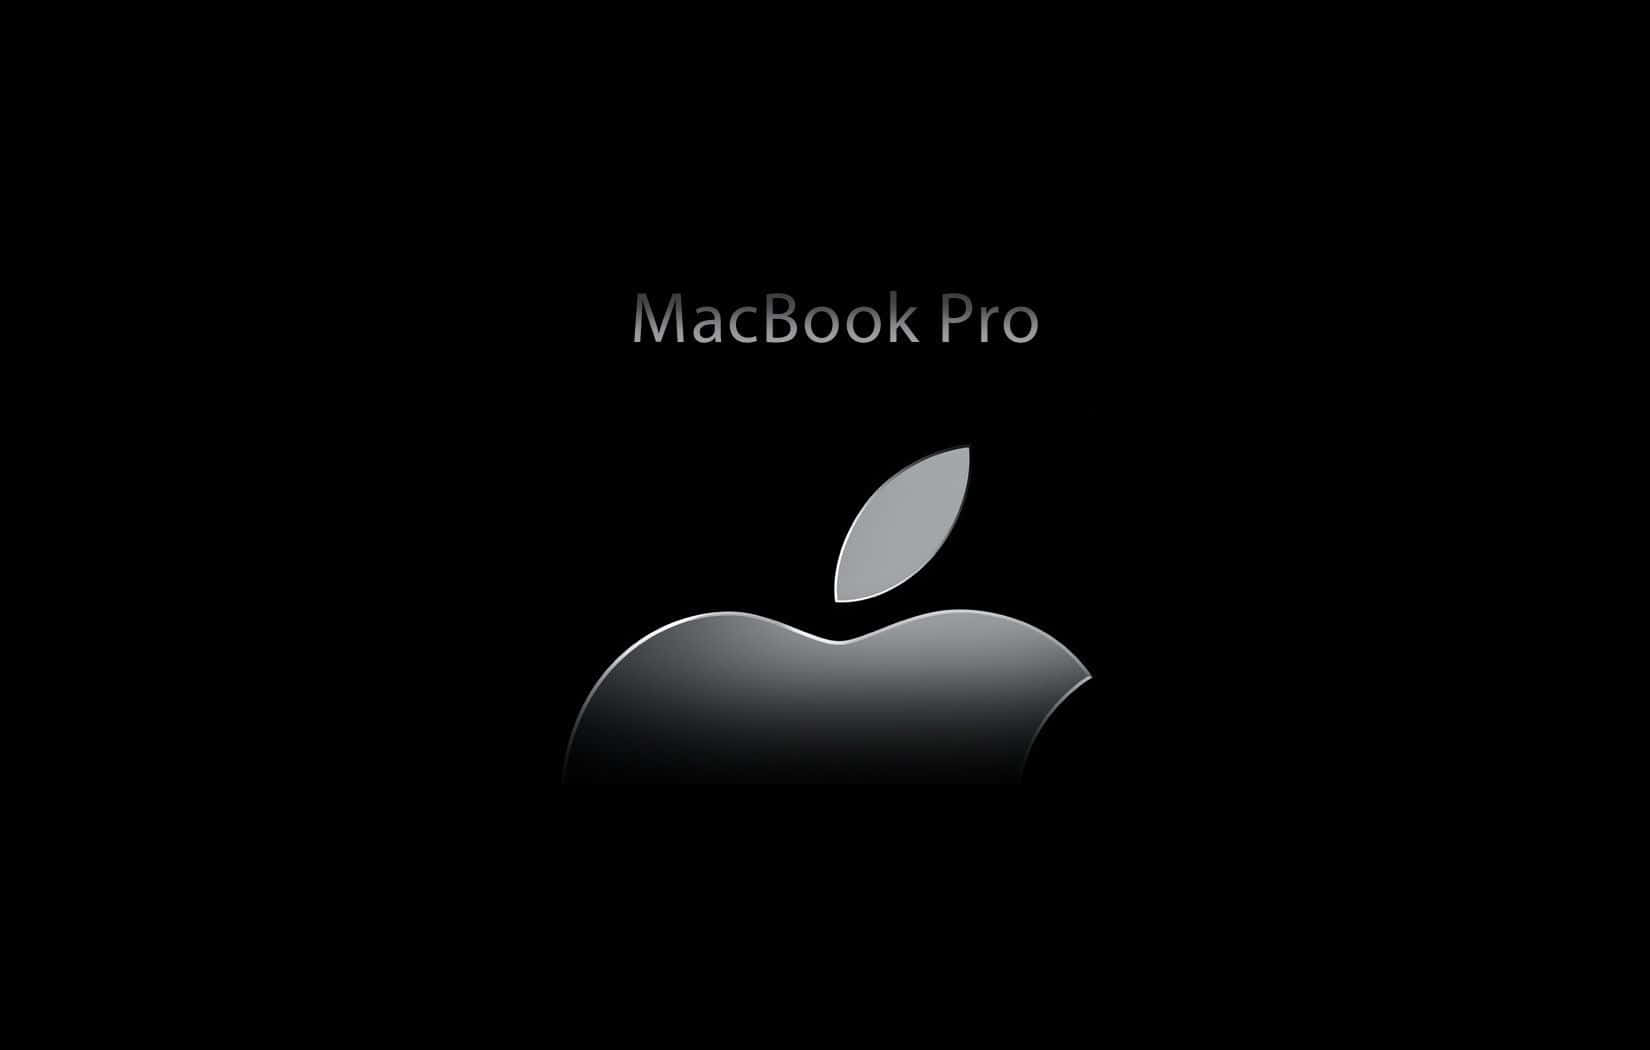 Get the power, versatility and style of the Apple laptop. Wallpaper